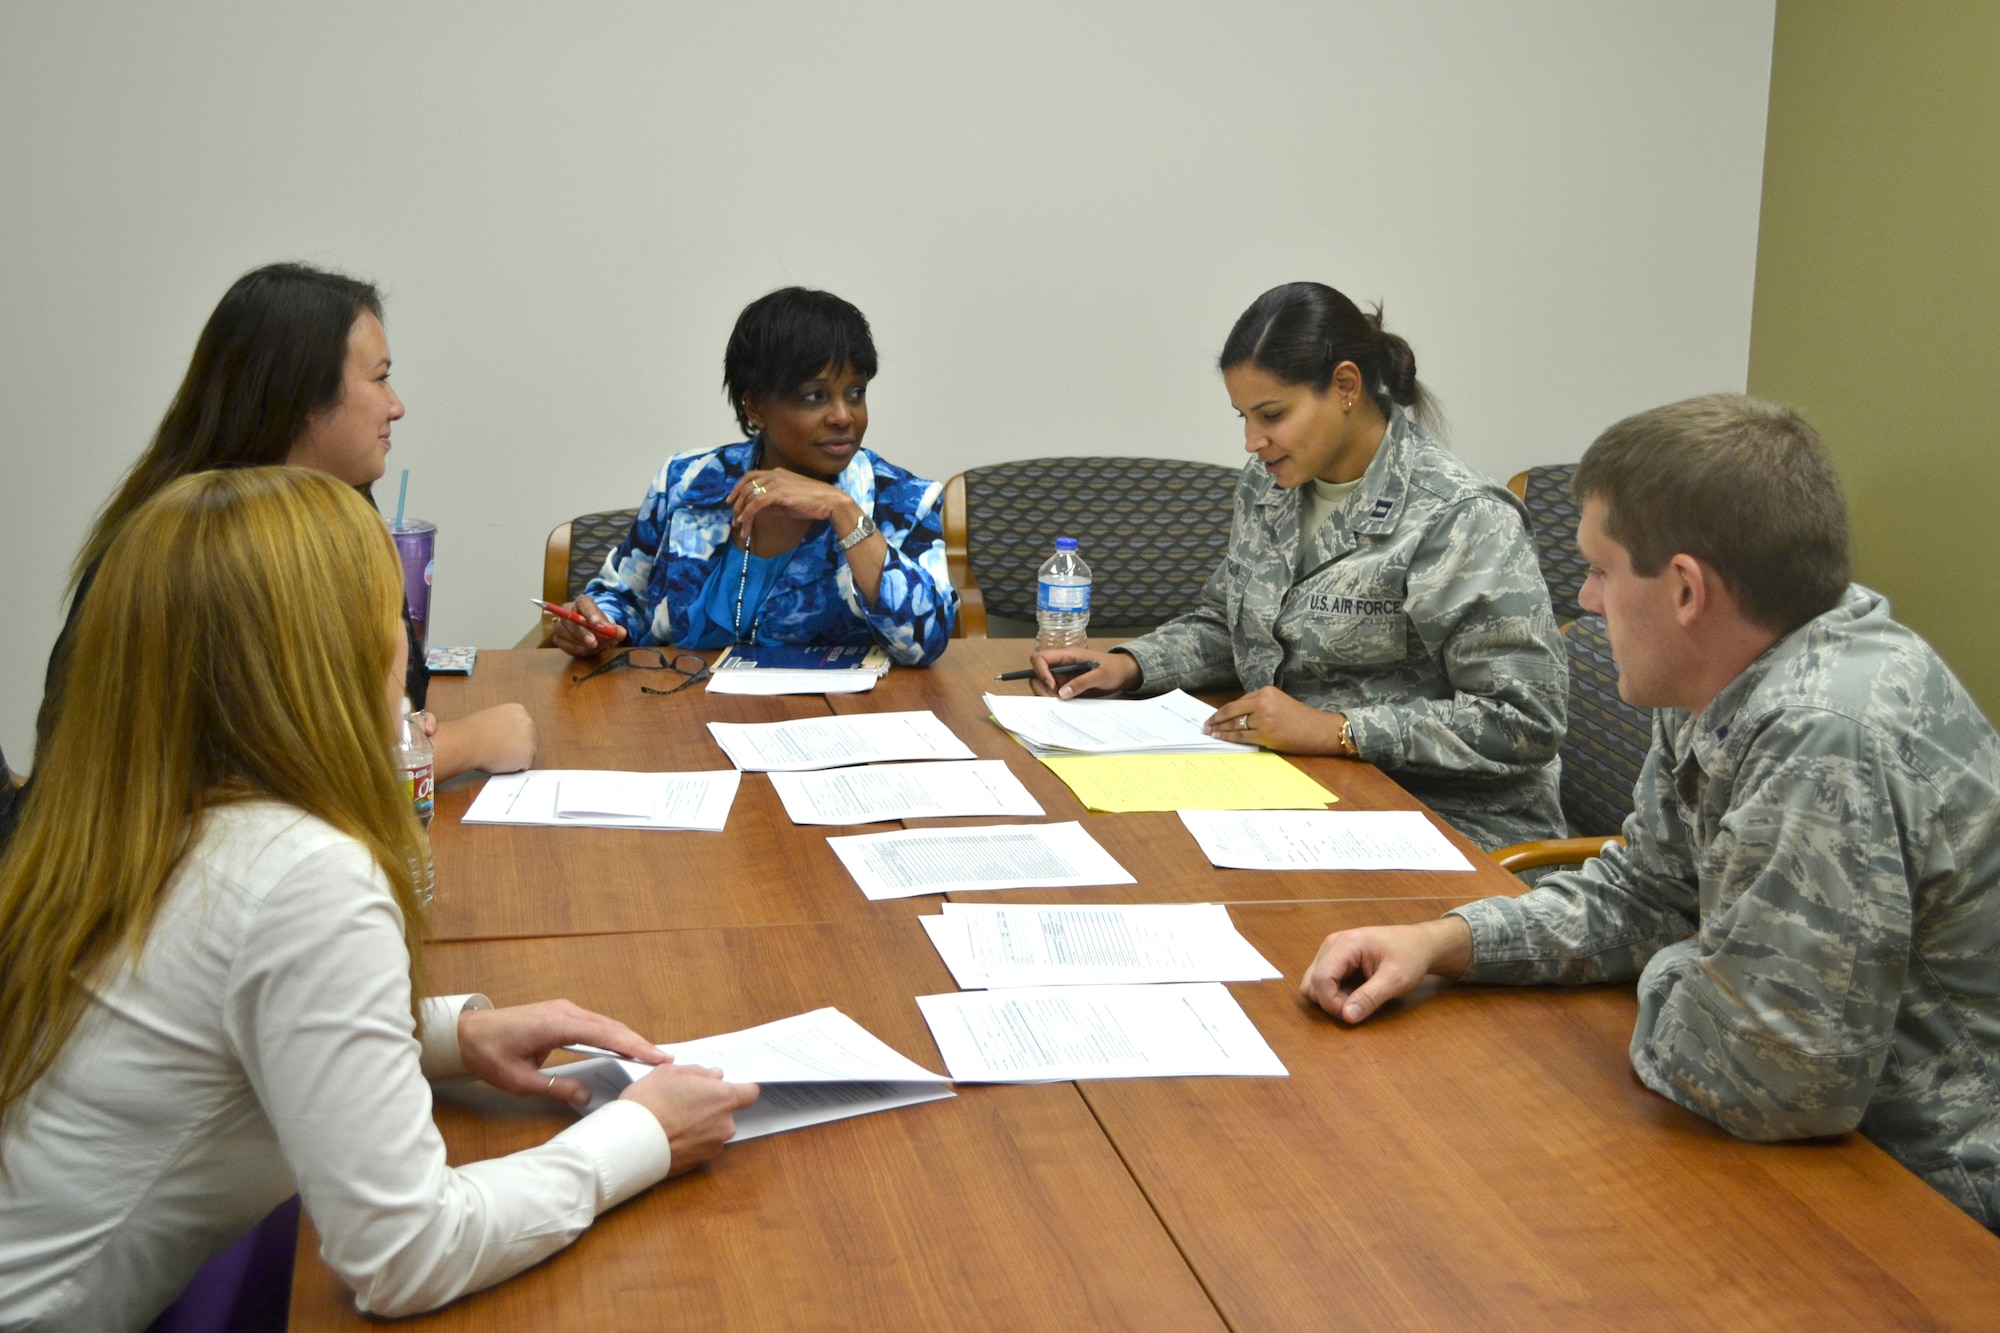 Mental Health Flight personnel meet. From left to right: Licensed Clinical Social Worker Hollis Ferrell, Psychologist Jerri Turner, Licensed Clinical Social Worker Valerie Tucker, Psychologist Capt. Mayrin Munguia and Psychologist Capt. Spencer Clayton.(Air Force photo by Brandice J. O’Brien)